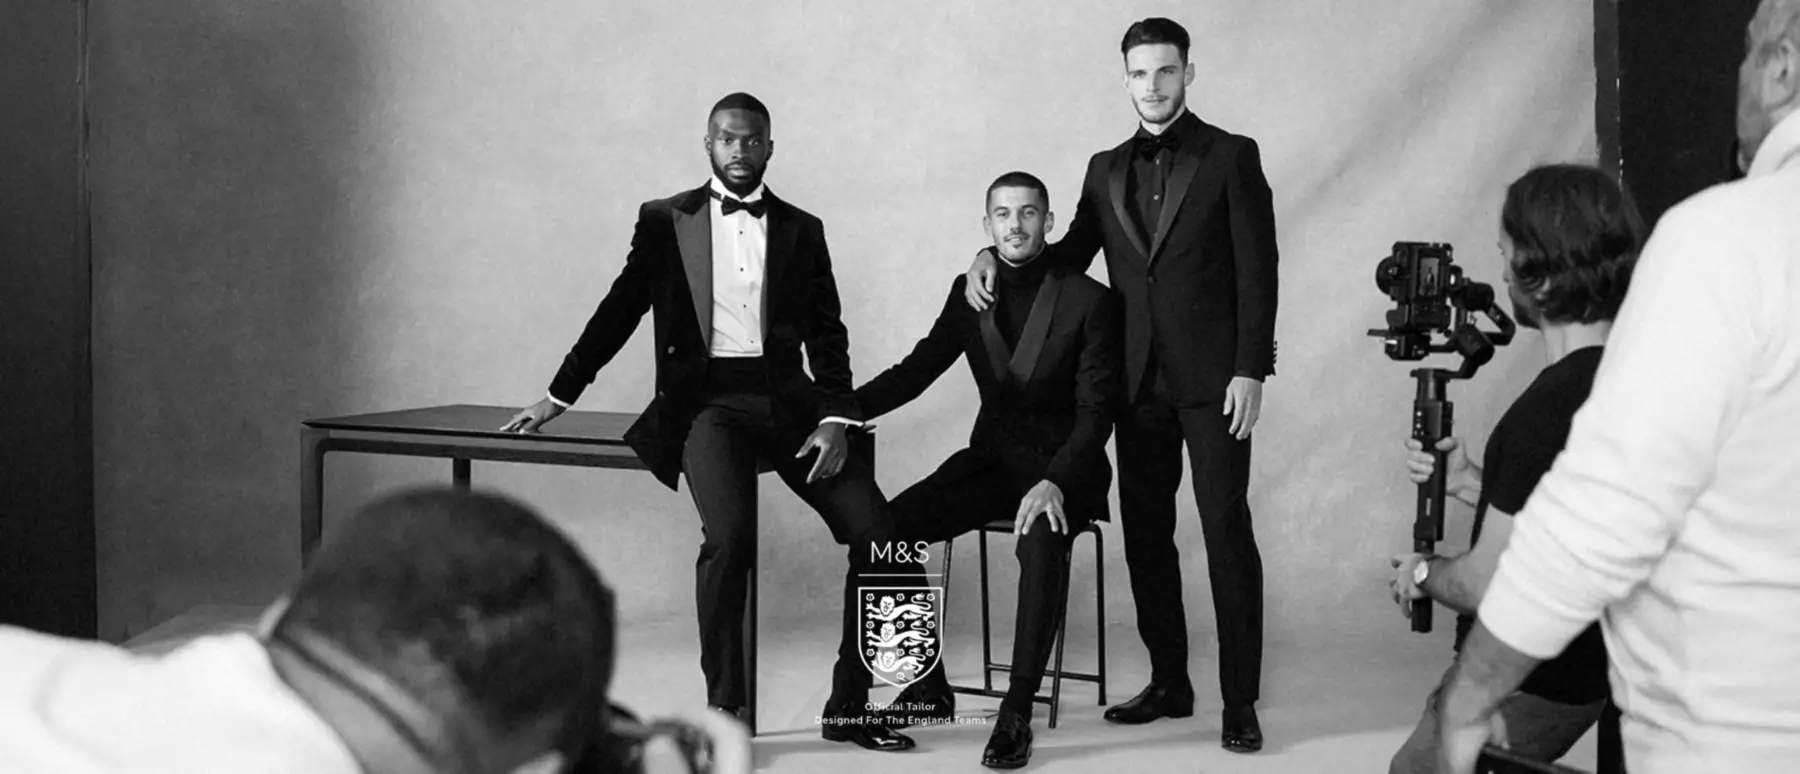 Footballers wearing suits from the M&S X ENGLAND collection